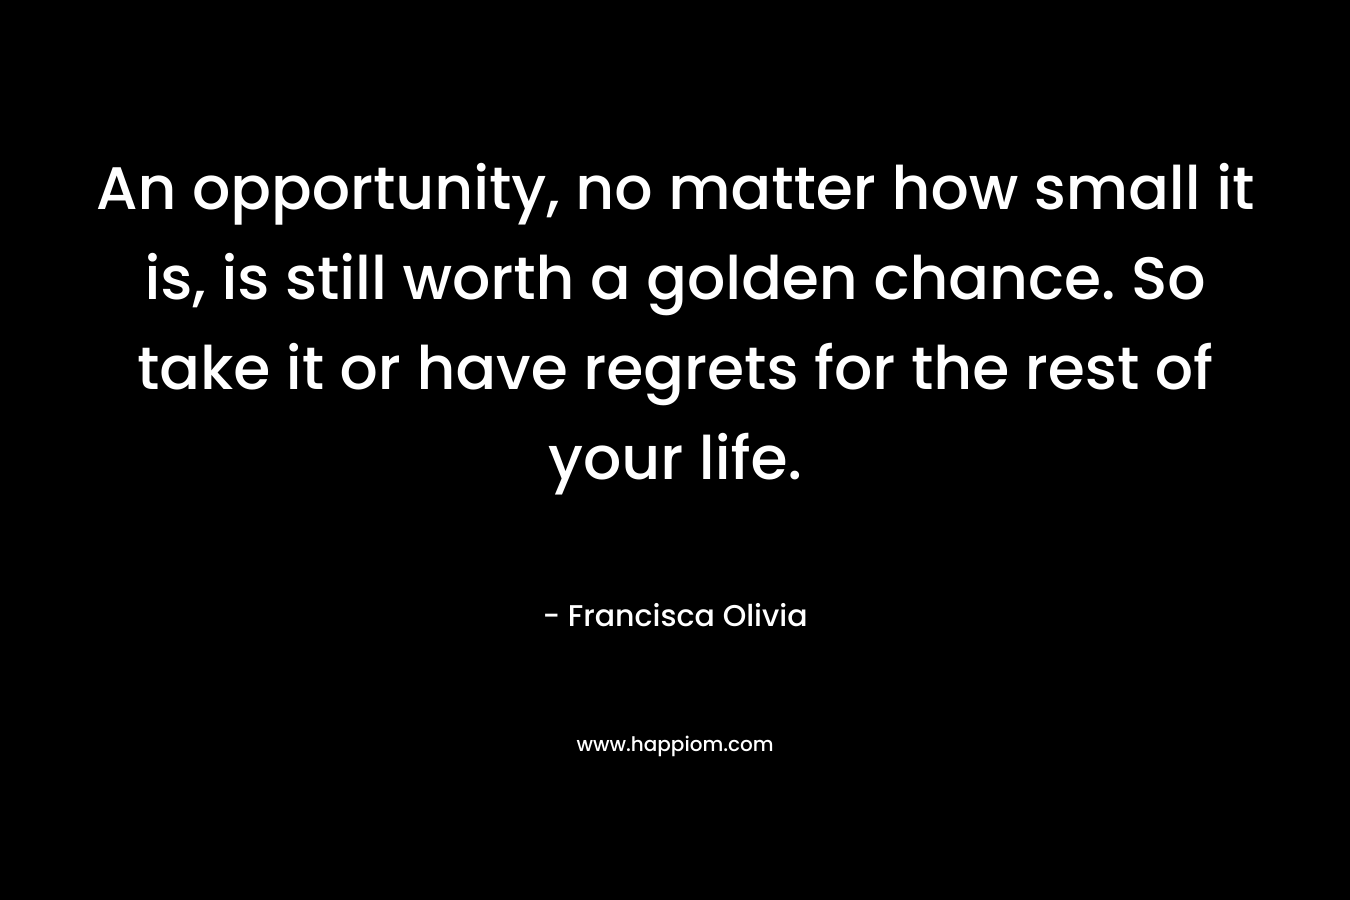 An opportunity, no matter how small it is, is still worth a golden chance. So take it or have regrets for the rest of your life.